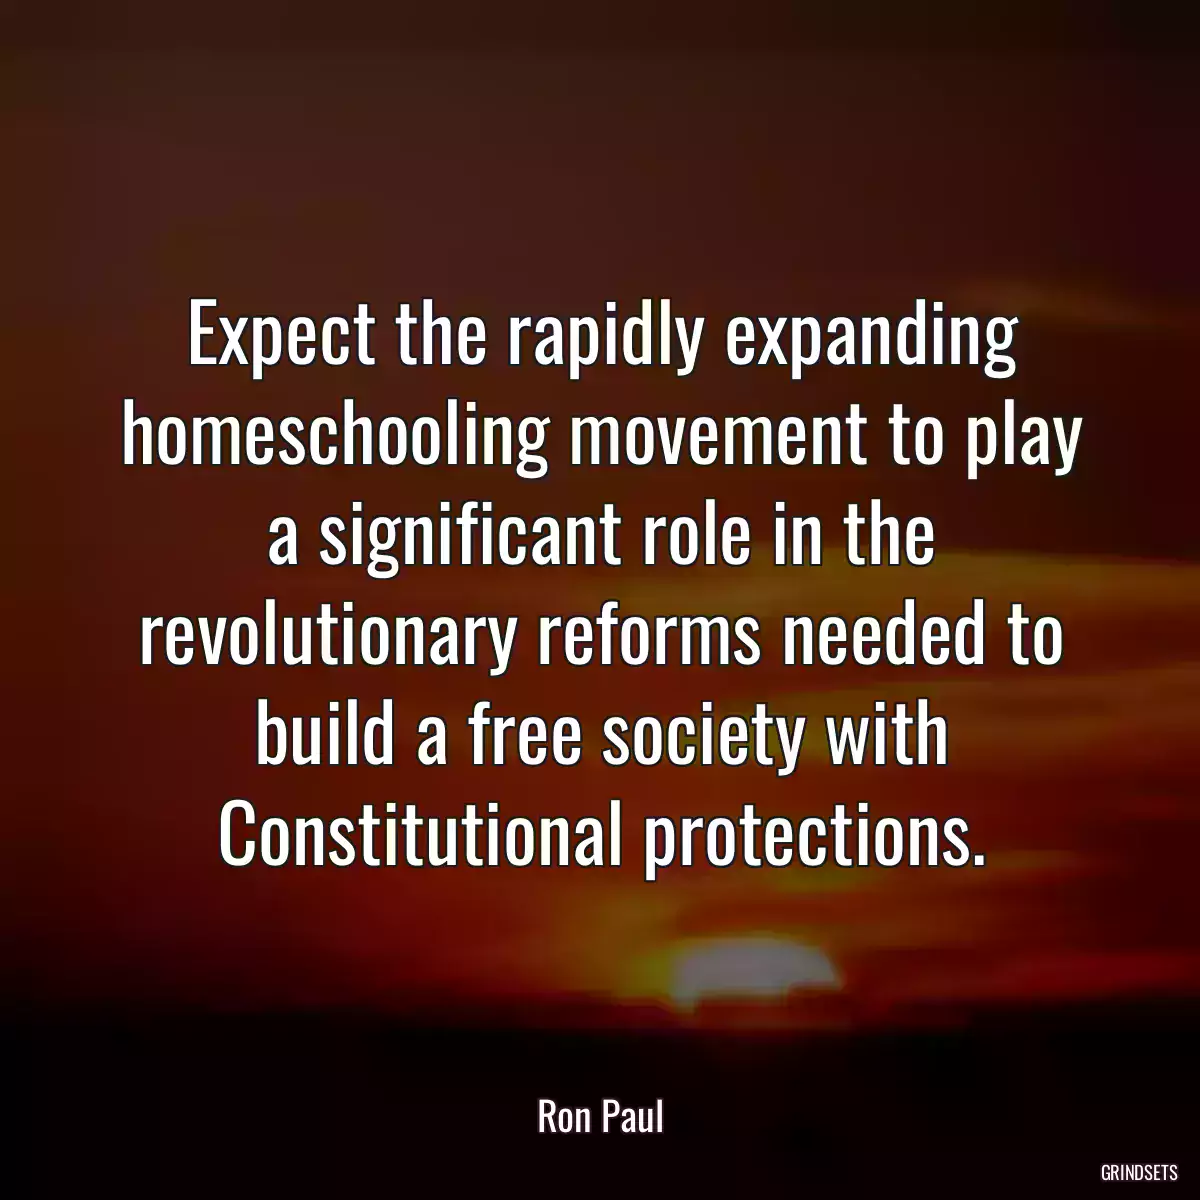 Expect the rapidly expanding homeschooling movement to play a significant role in the revolutionary reforms needed to build a free society with Constitutional protections.